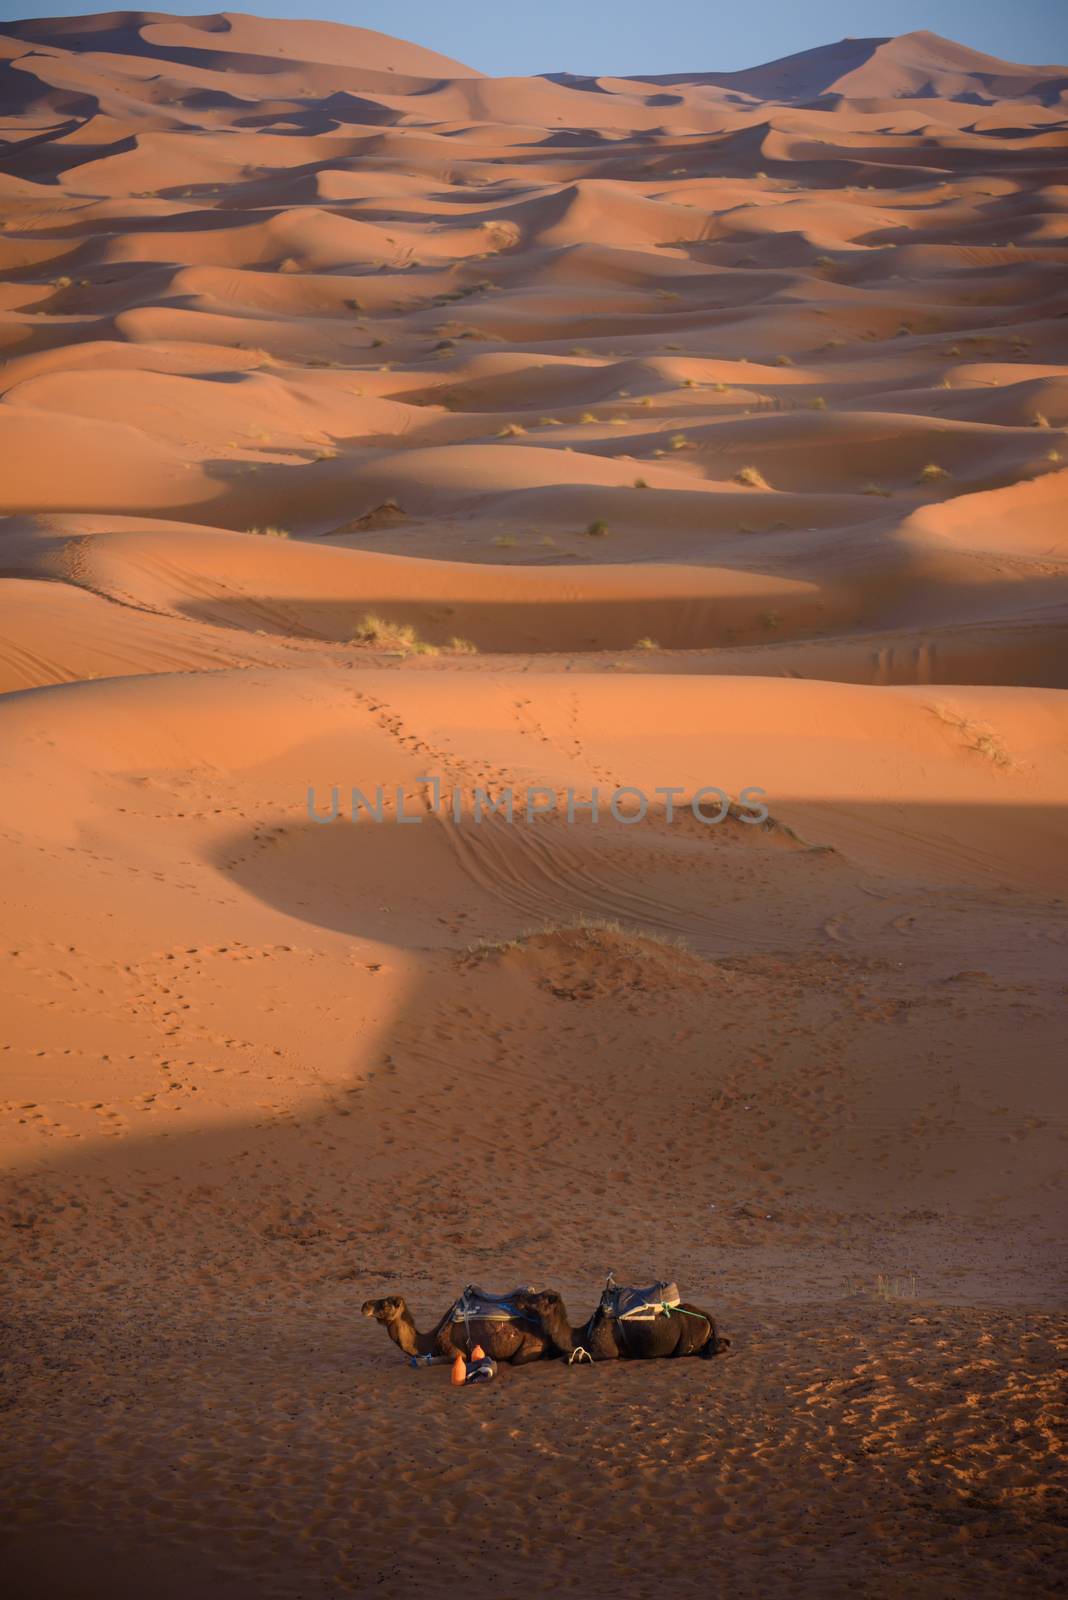 Camels at the dunes, Morocco, Sahara Desert by johnnychaos